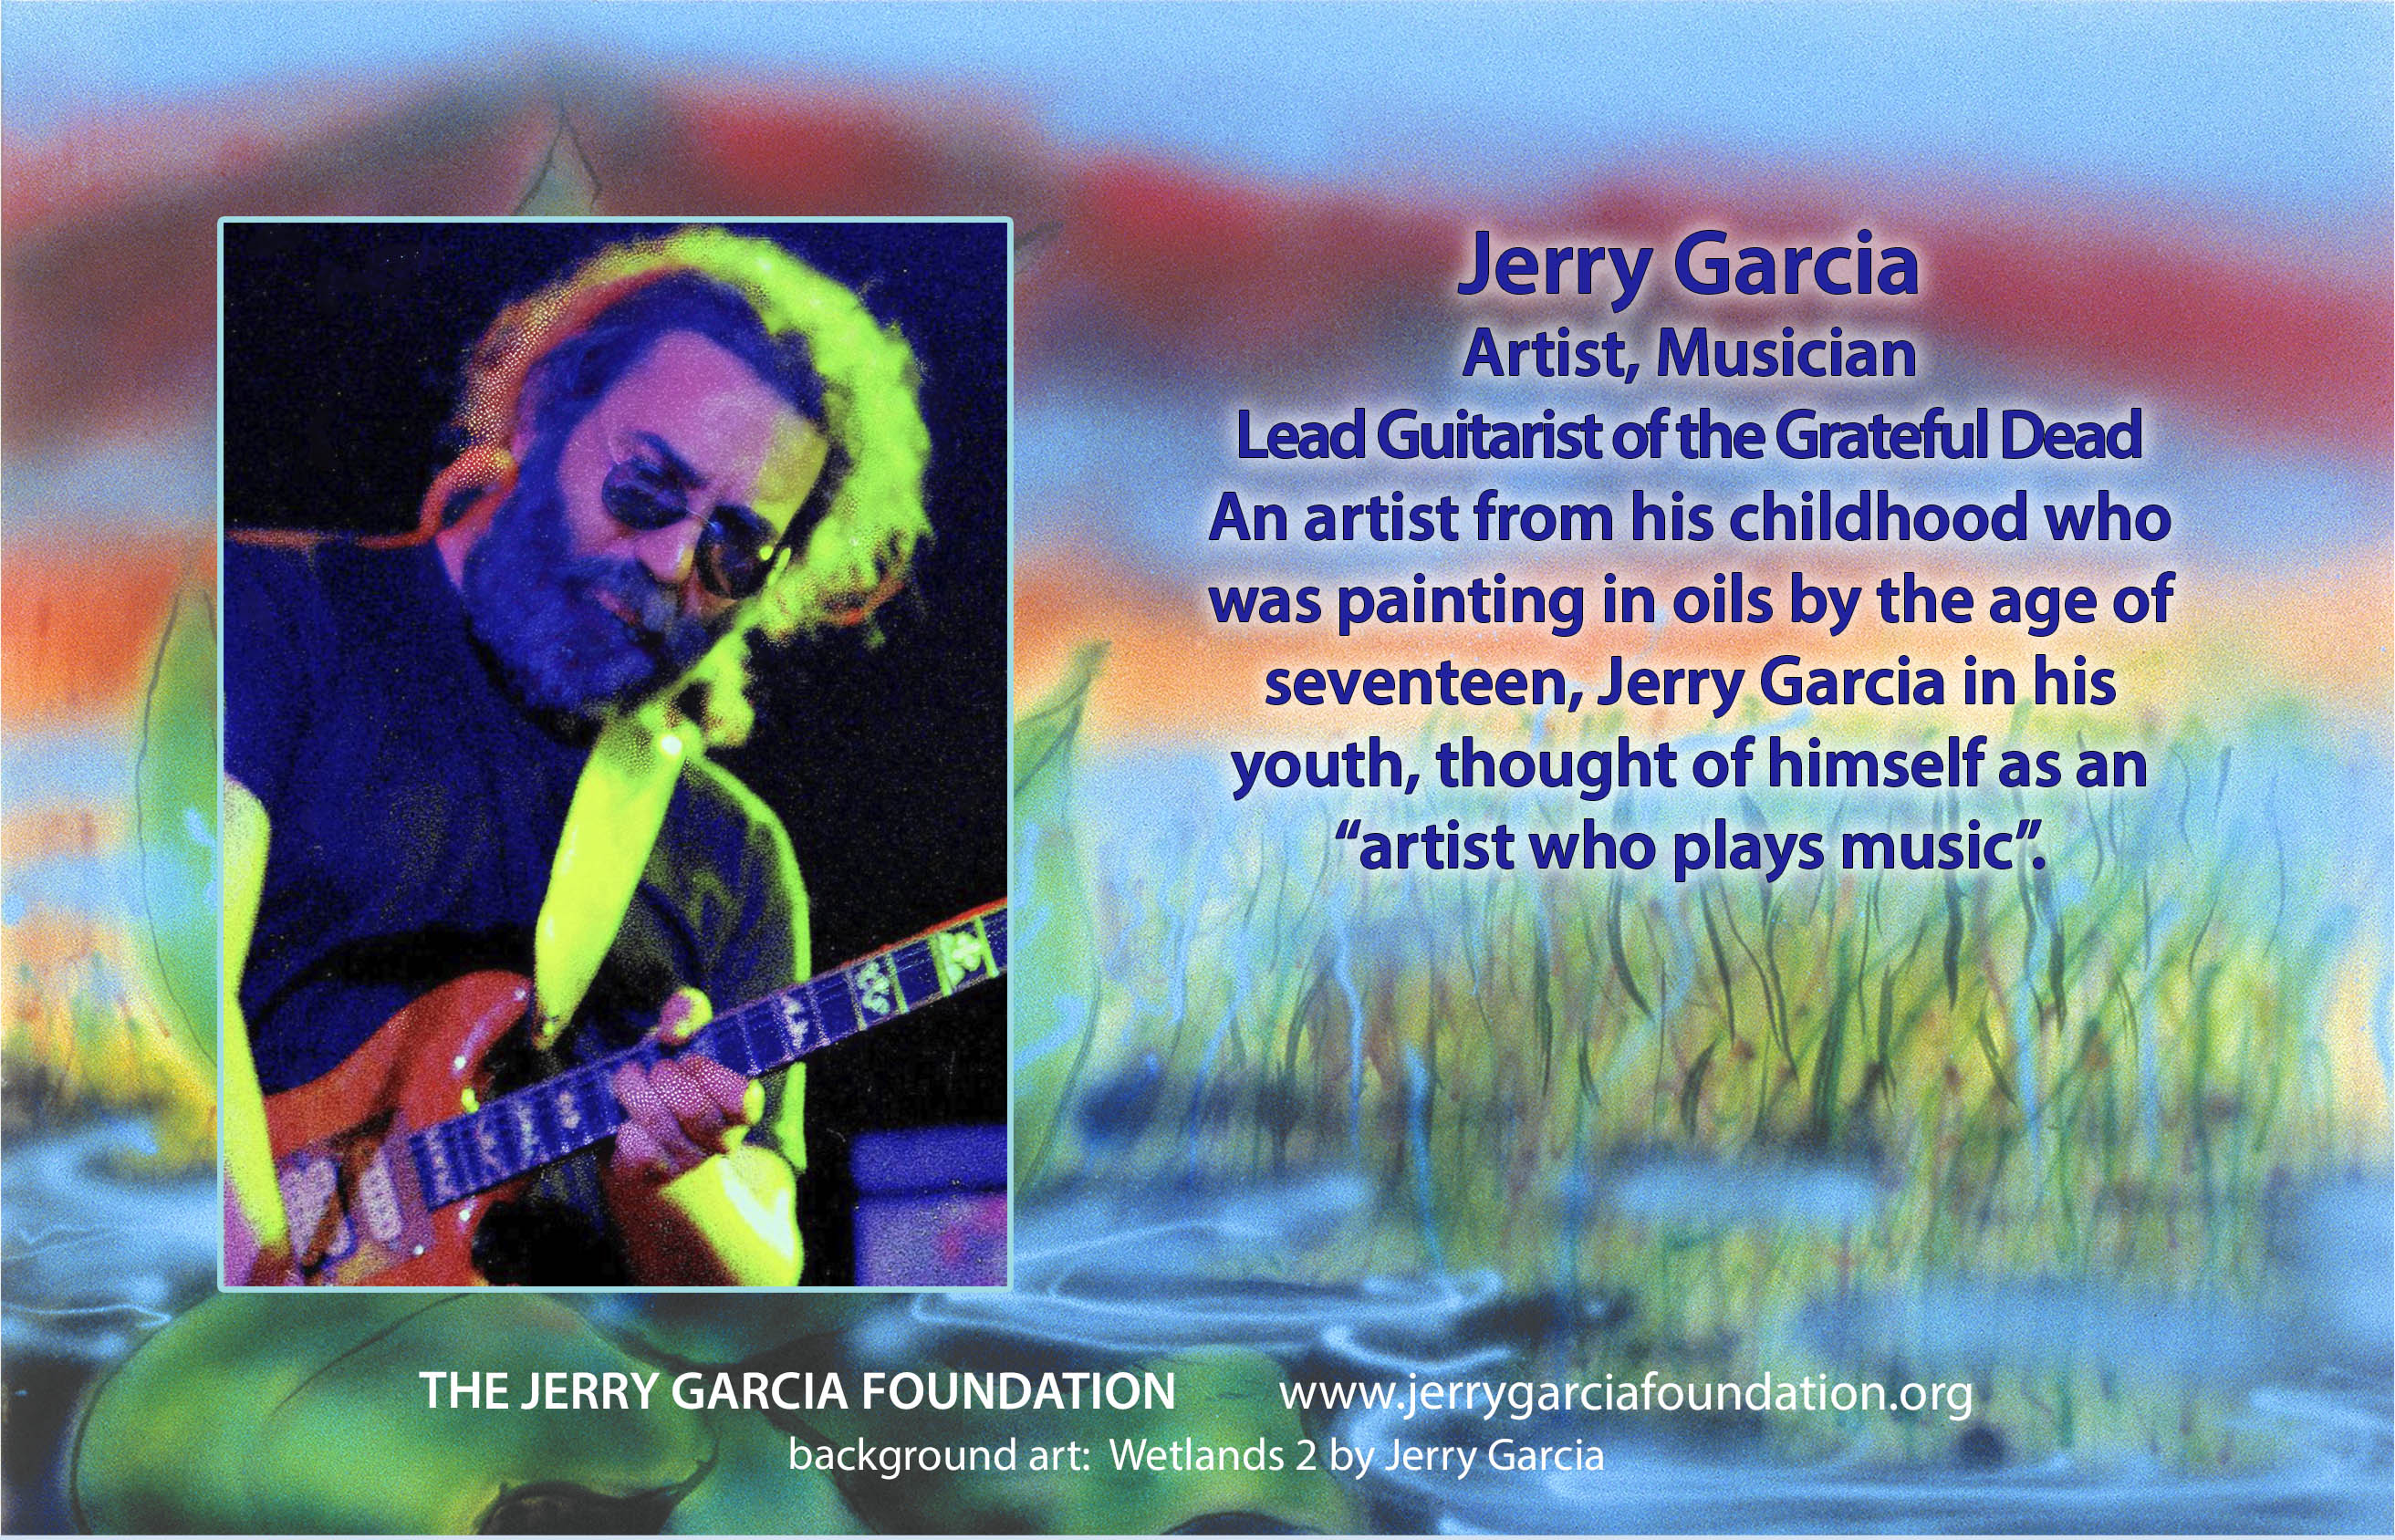 Jerry Garcia Foundation Contributes Artwork to History of Diving Museum for Rainbow Full of Sound “Grateful Dead” Tribute Concert